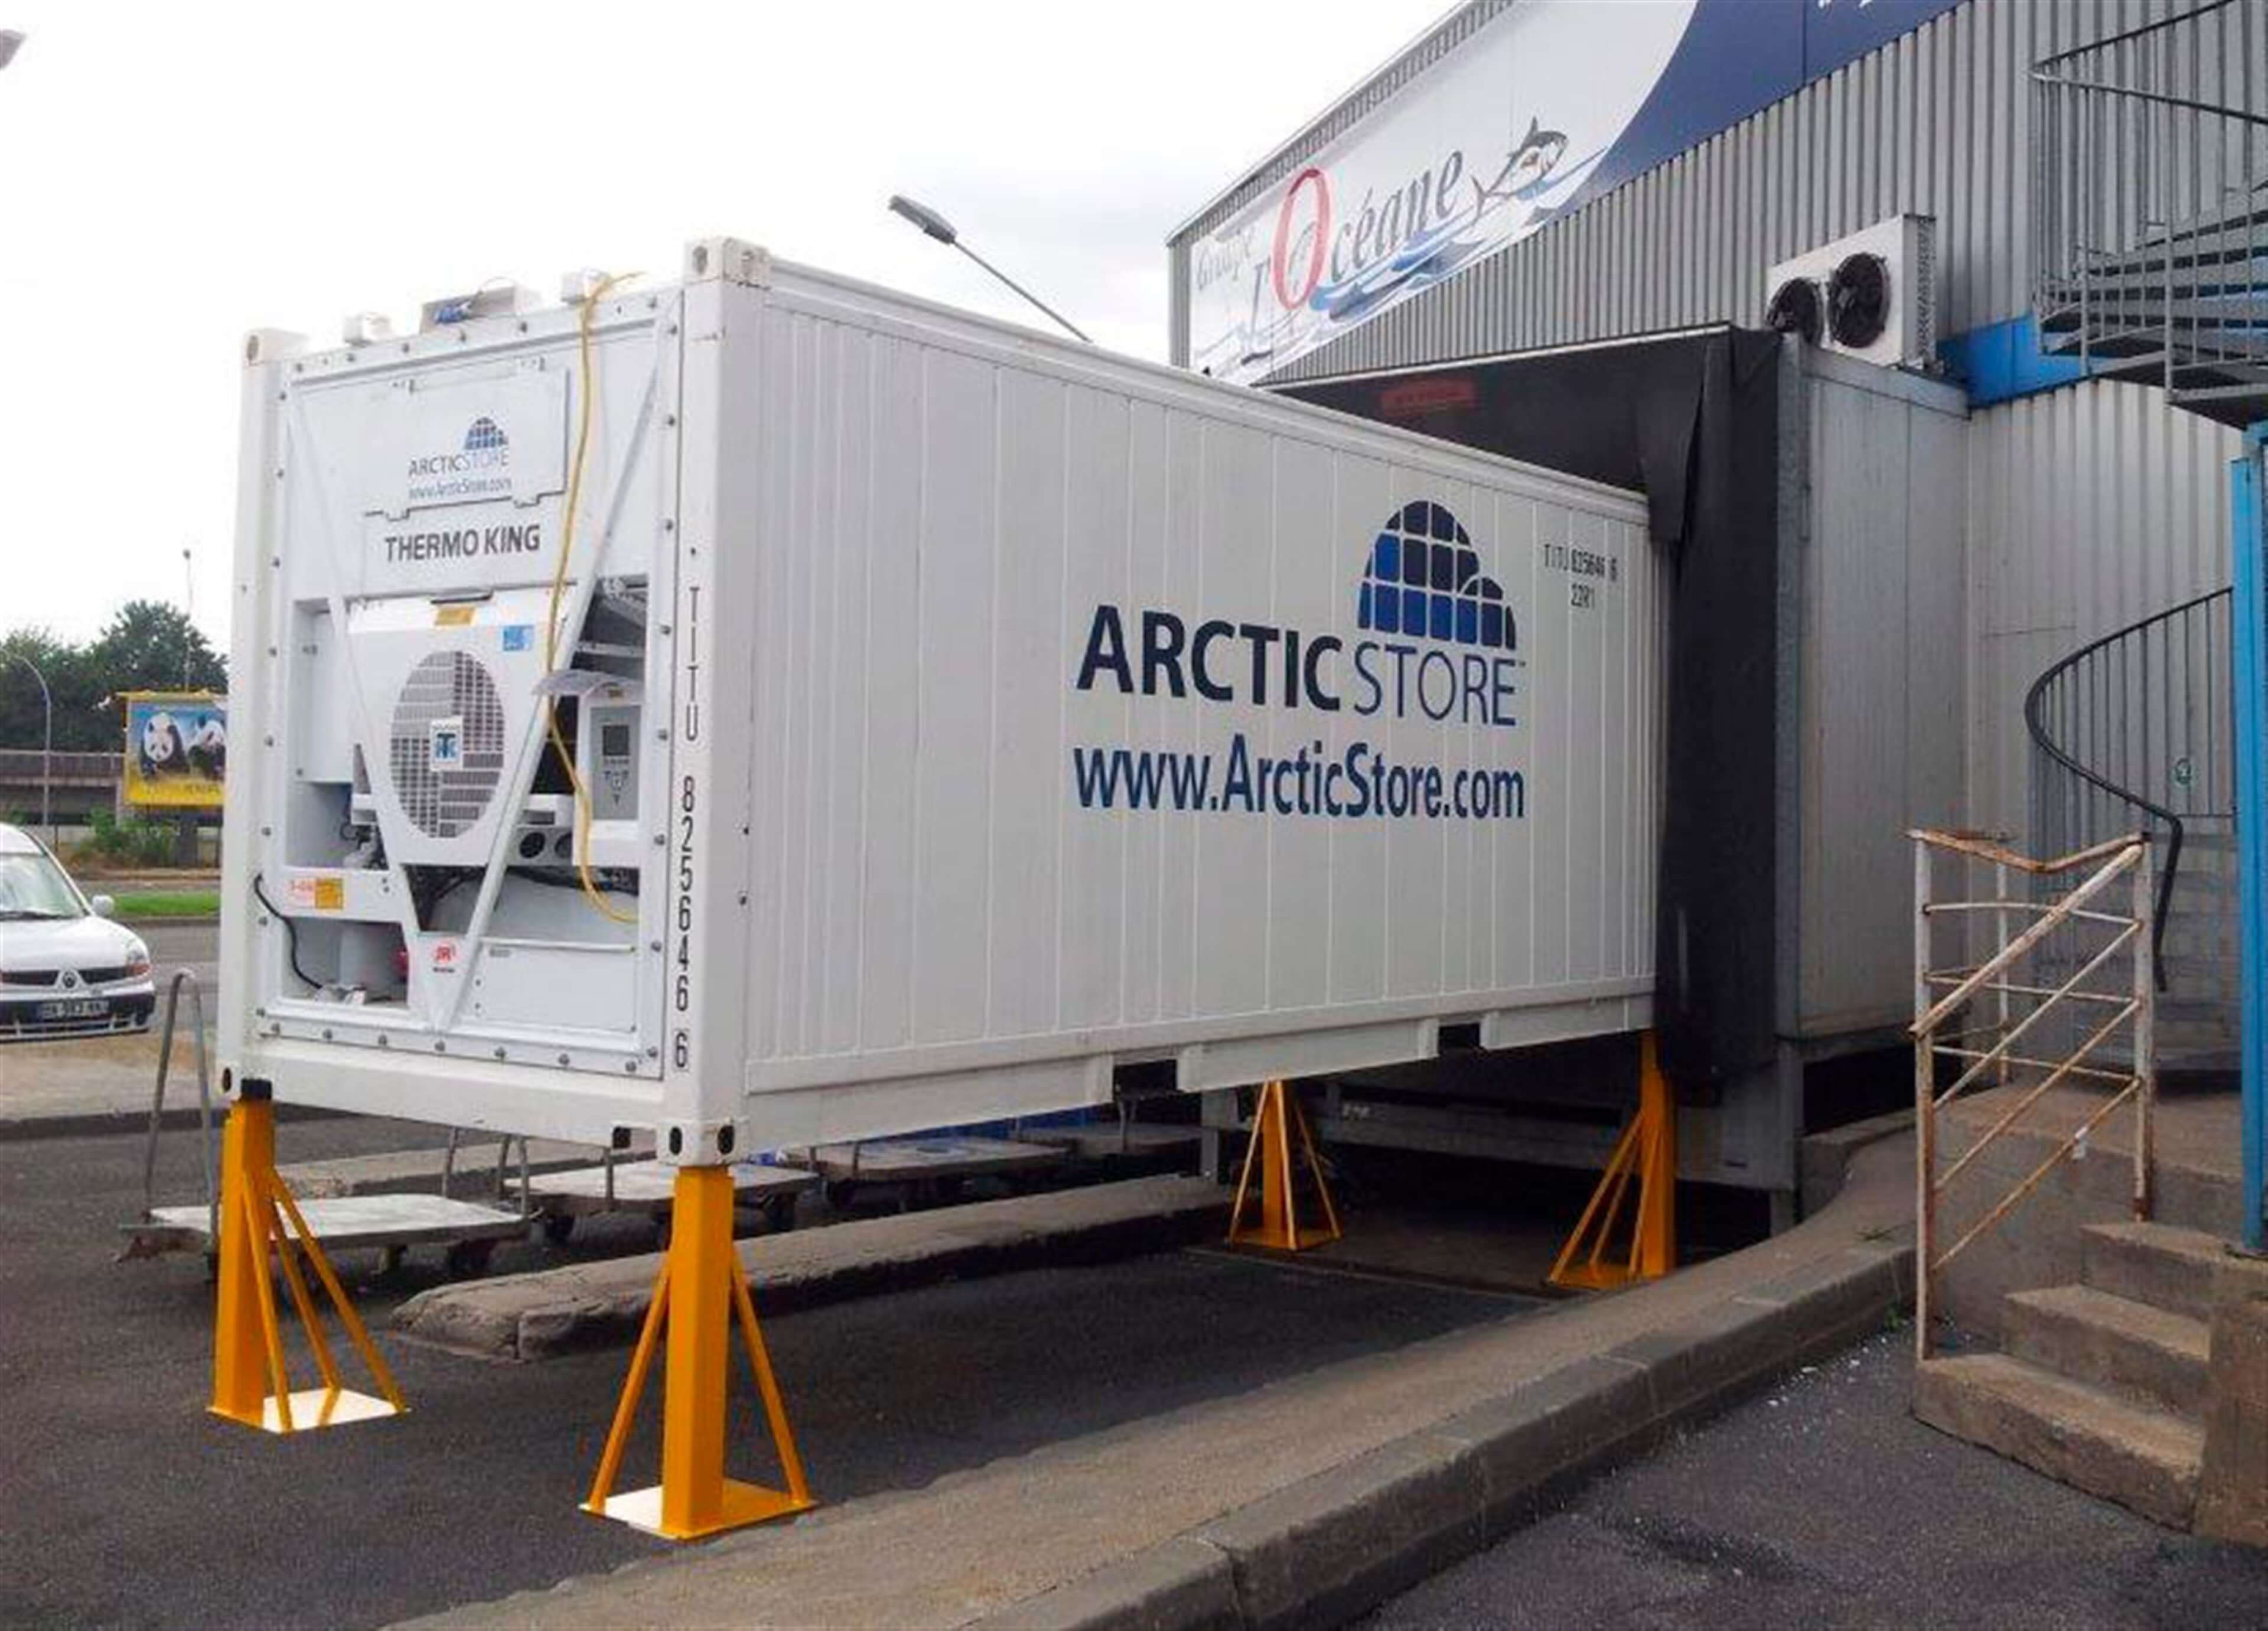 Arcticstore Container with support legs - TITAN Containers